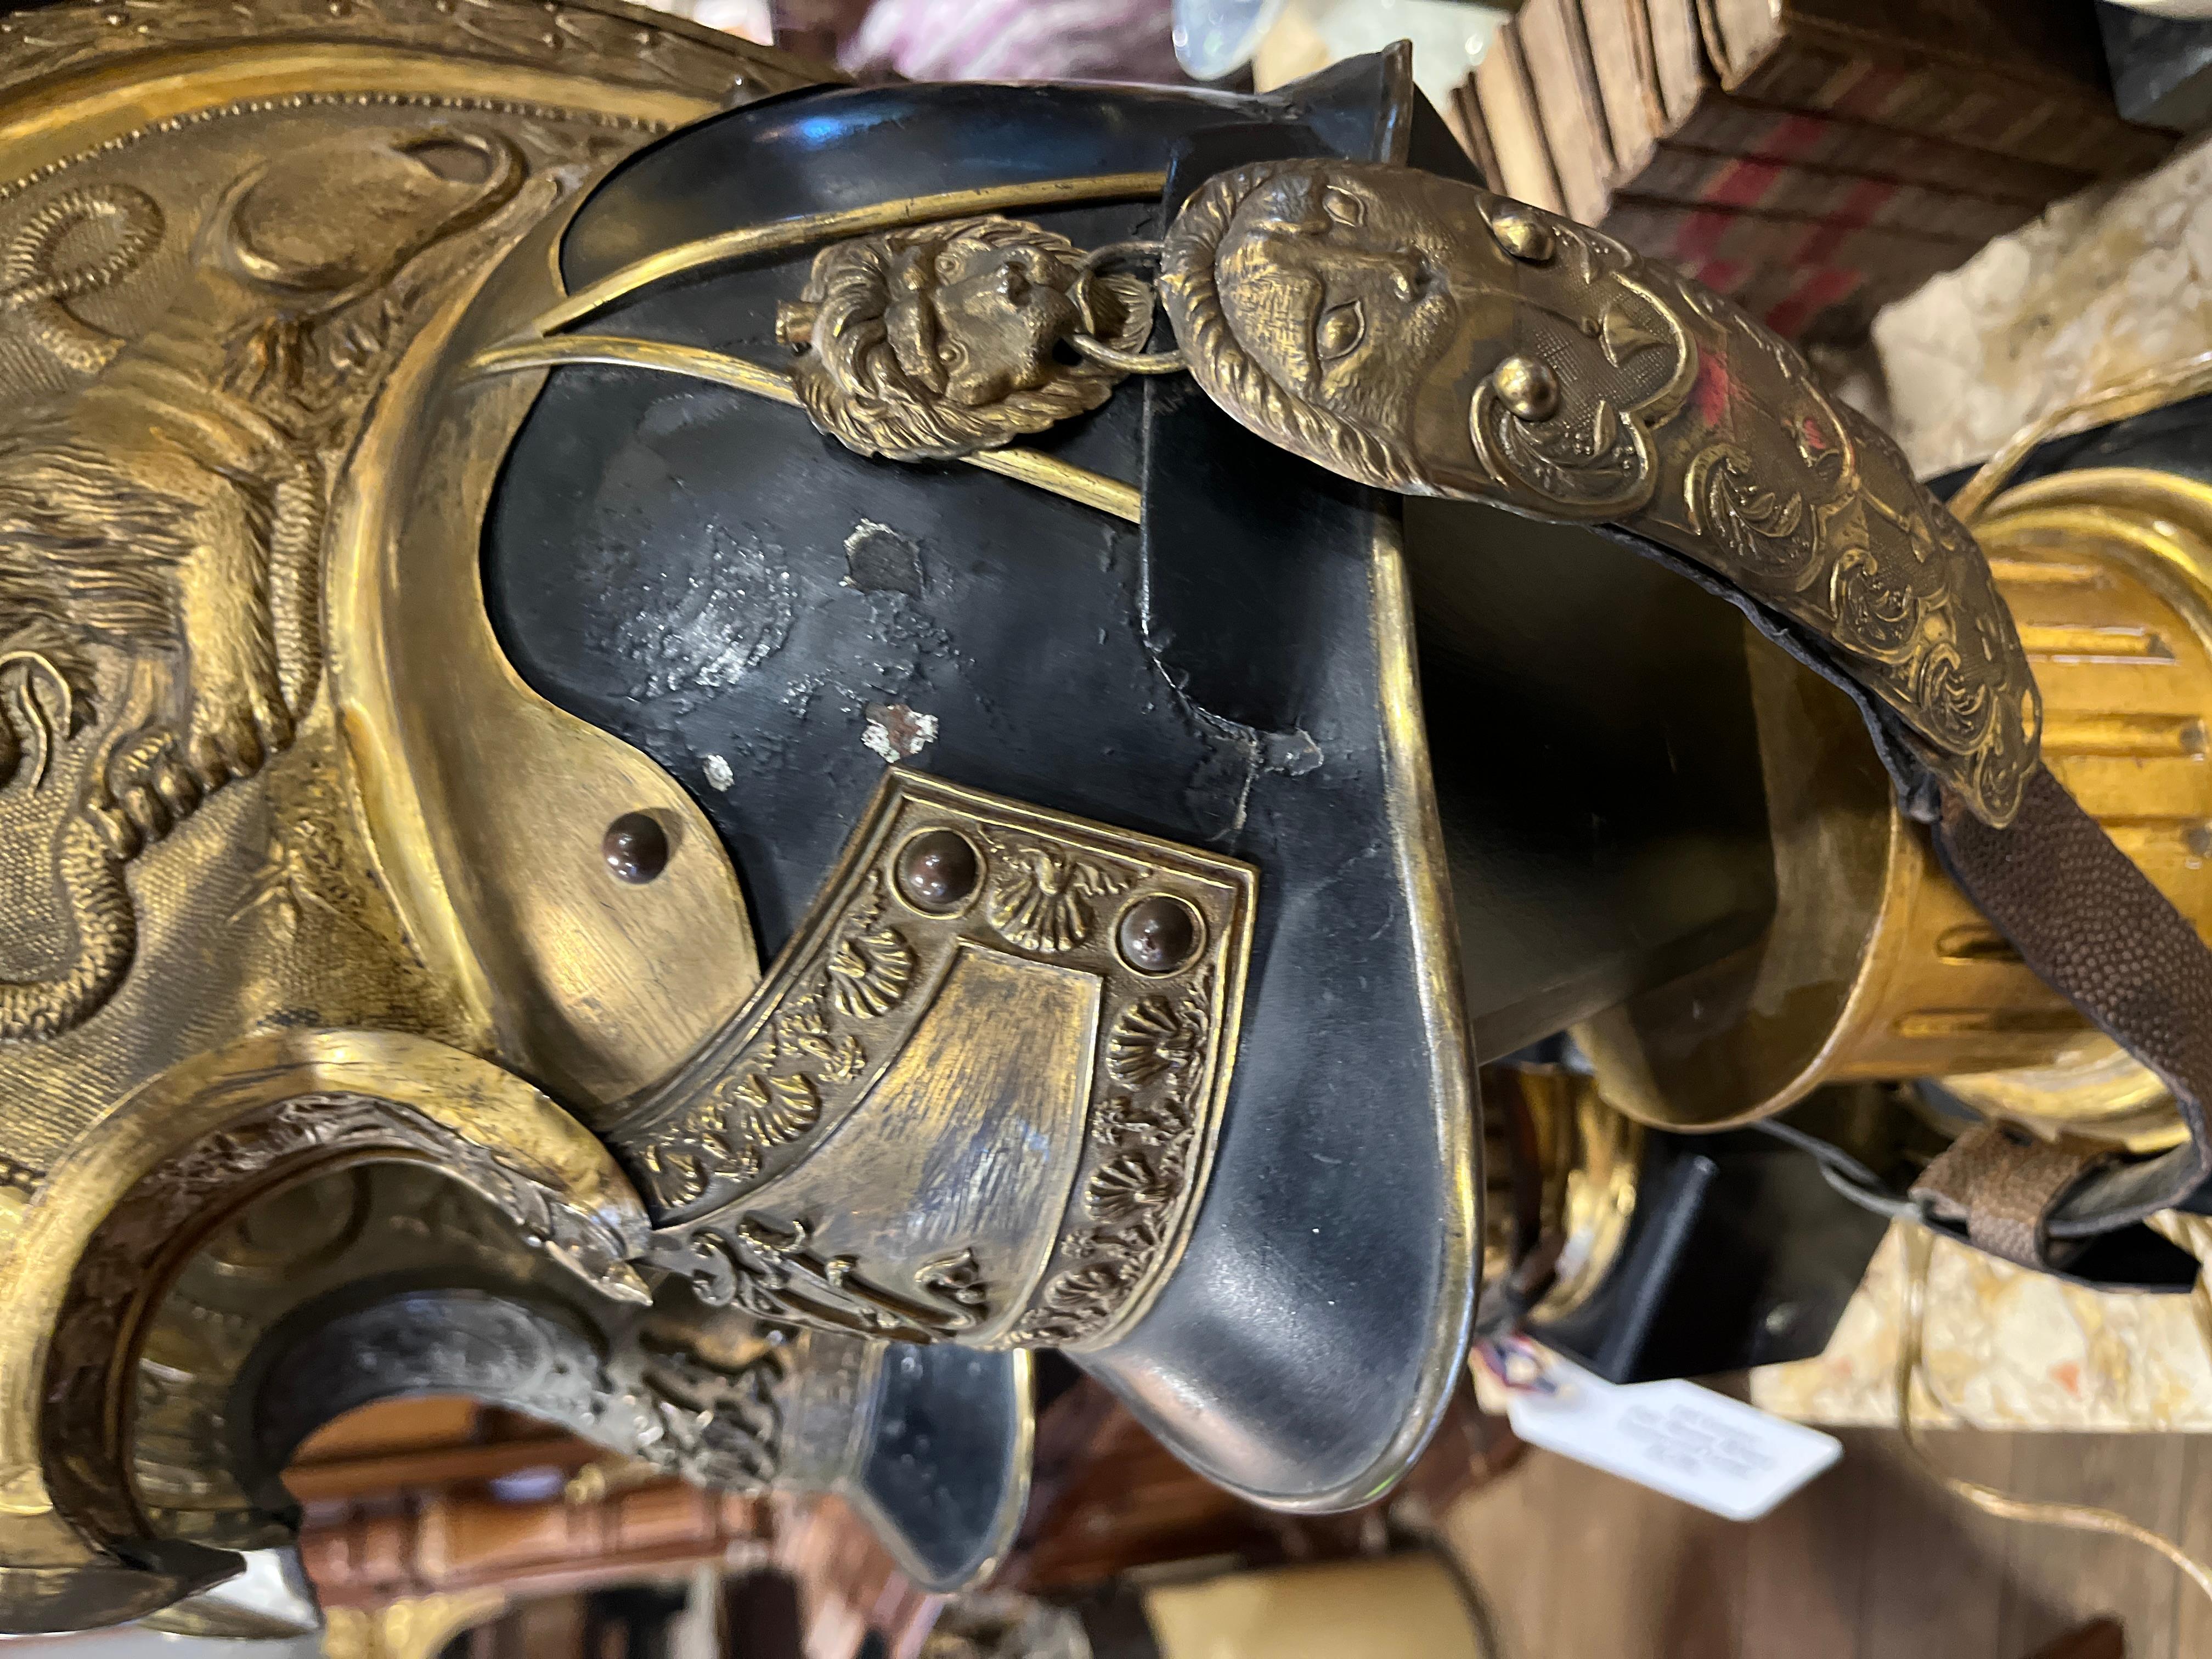 Pair of Antique French Military Helmets Converted to Lamps. Beautiful patina on the helmet with the original leather chin straps.